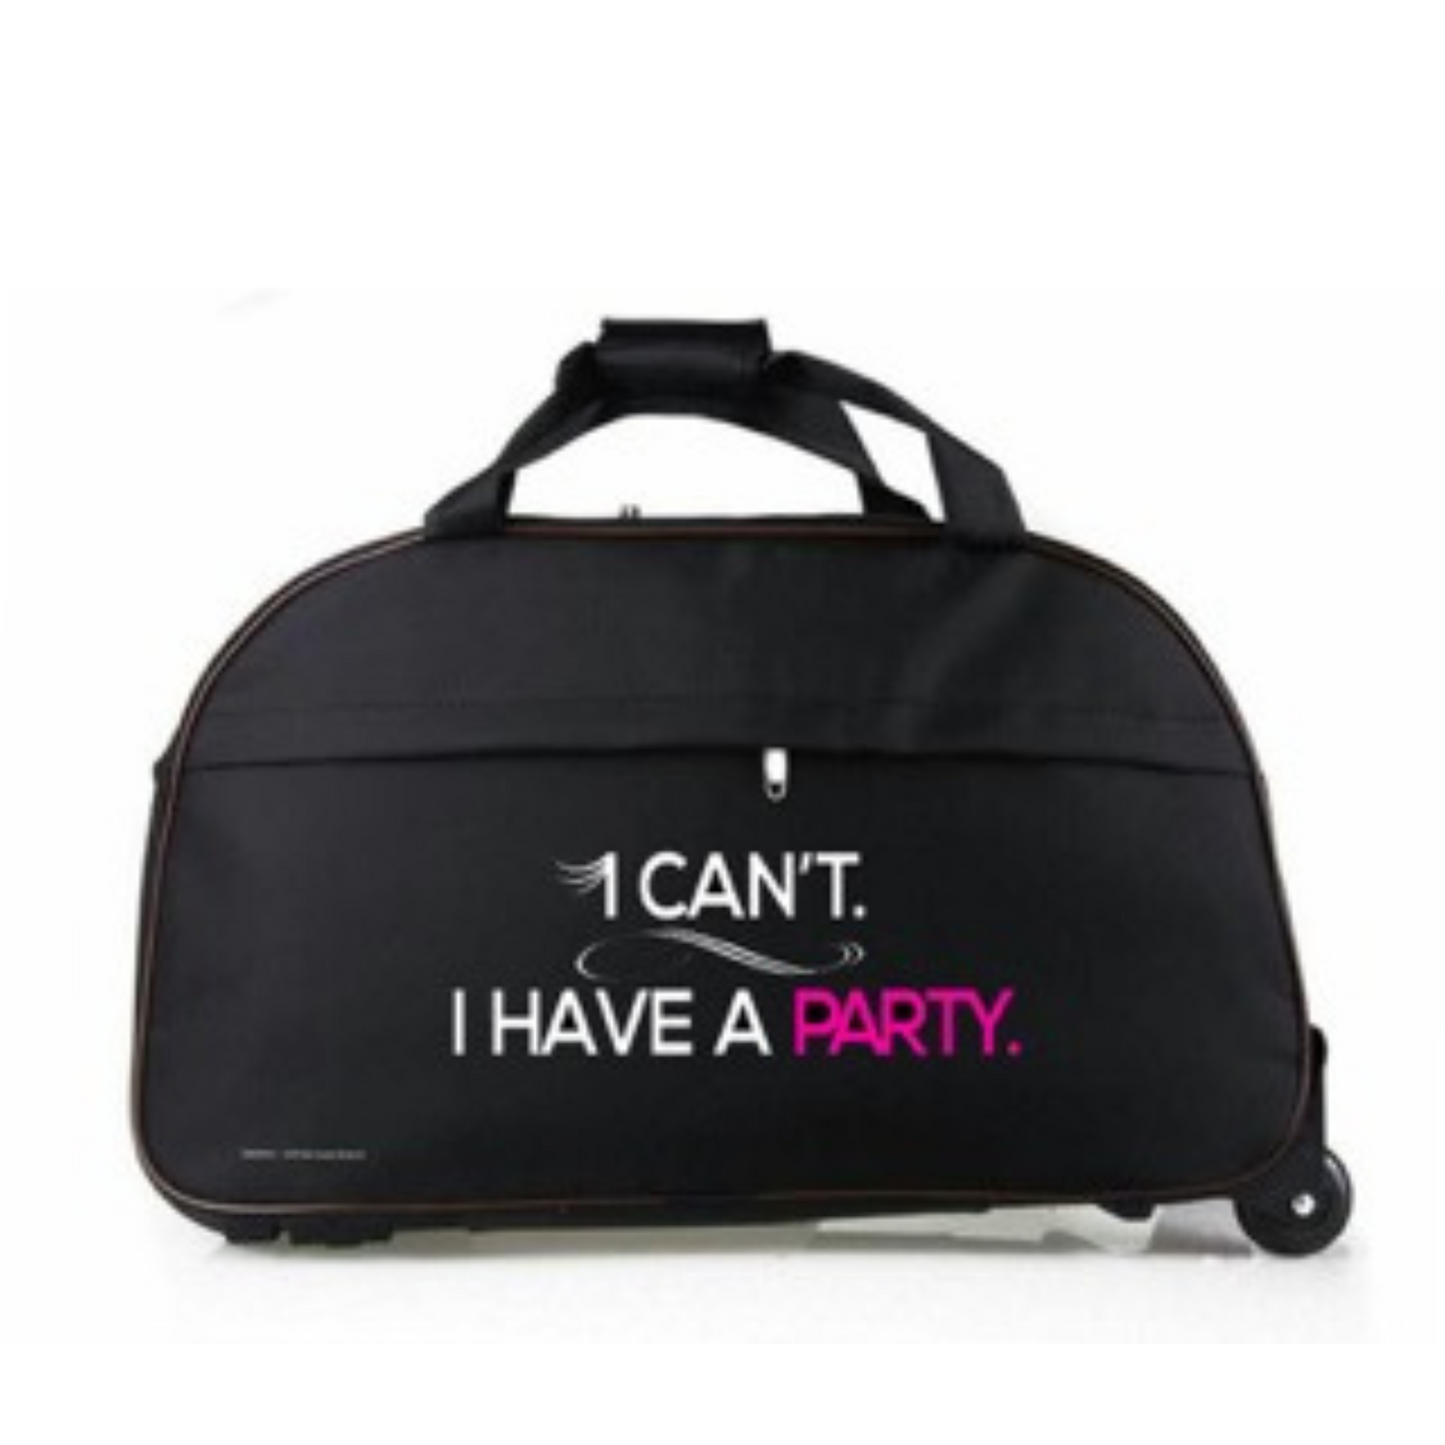 "I Can't, I Have a Party" Wheel Duffle Bag